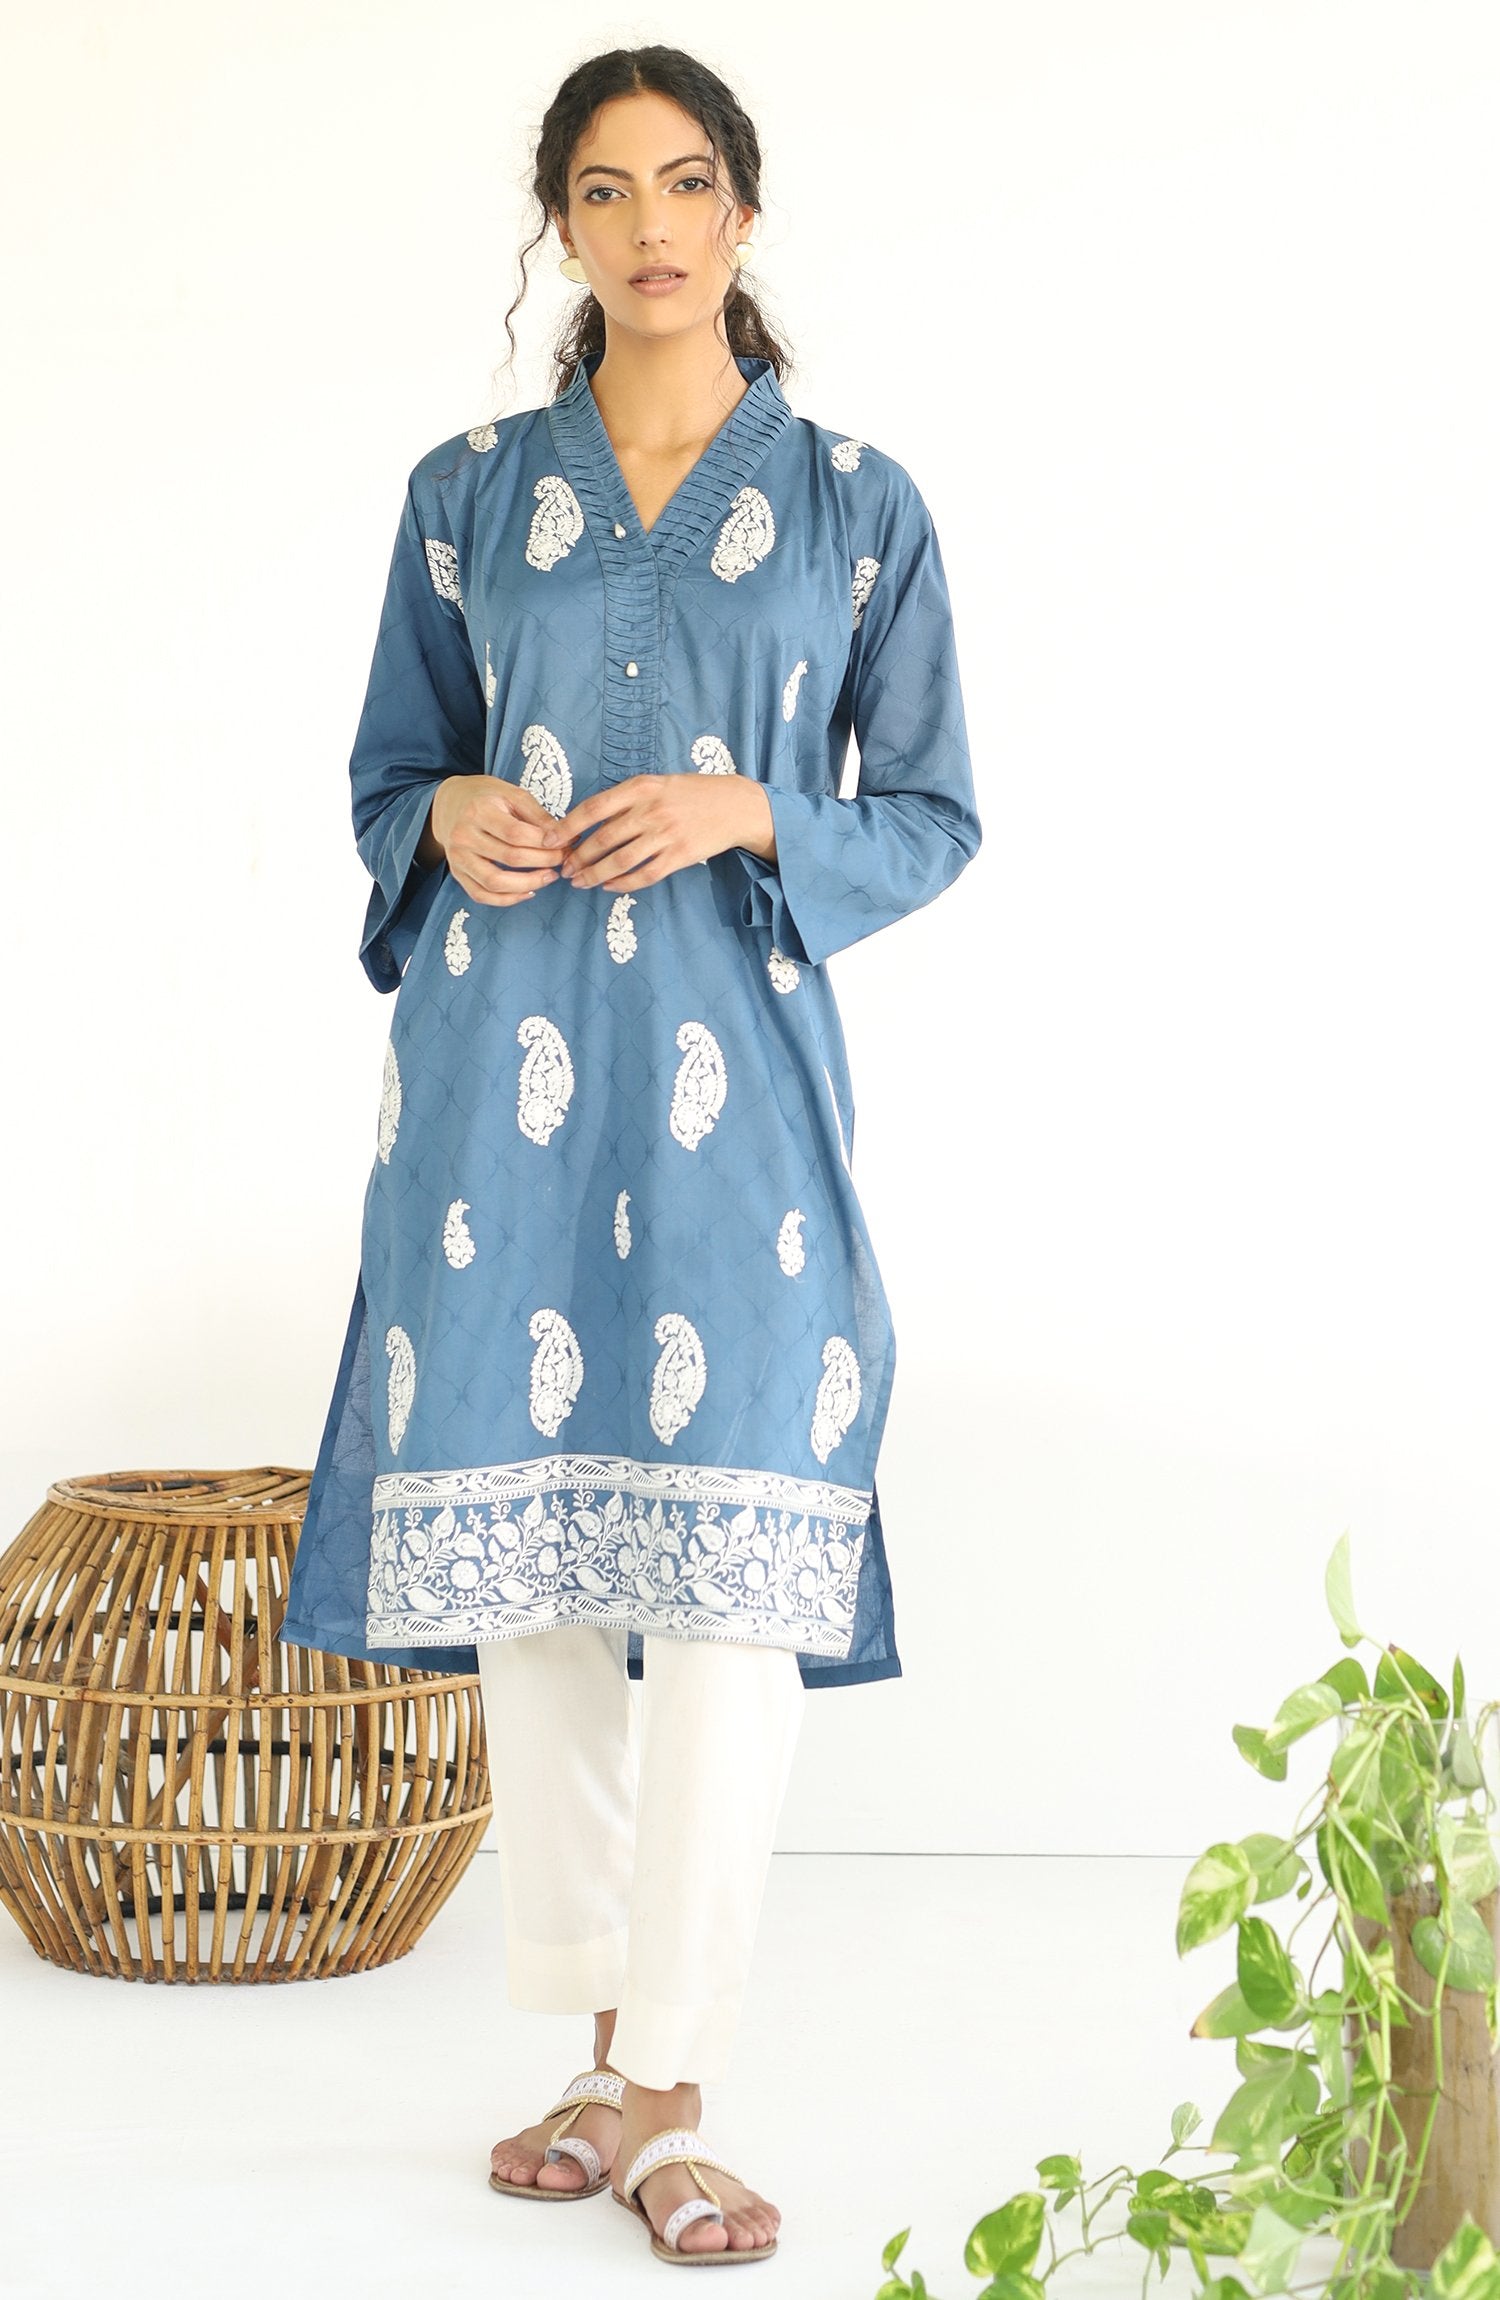 Stitched 1 Piece Embroidered Jacquard Shirt (nrds-148)